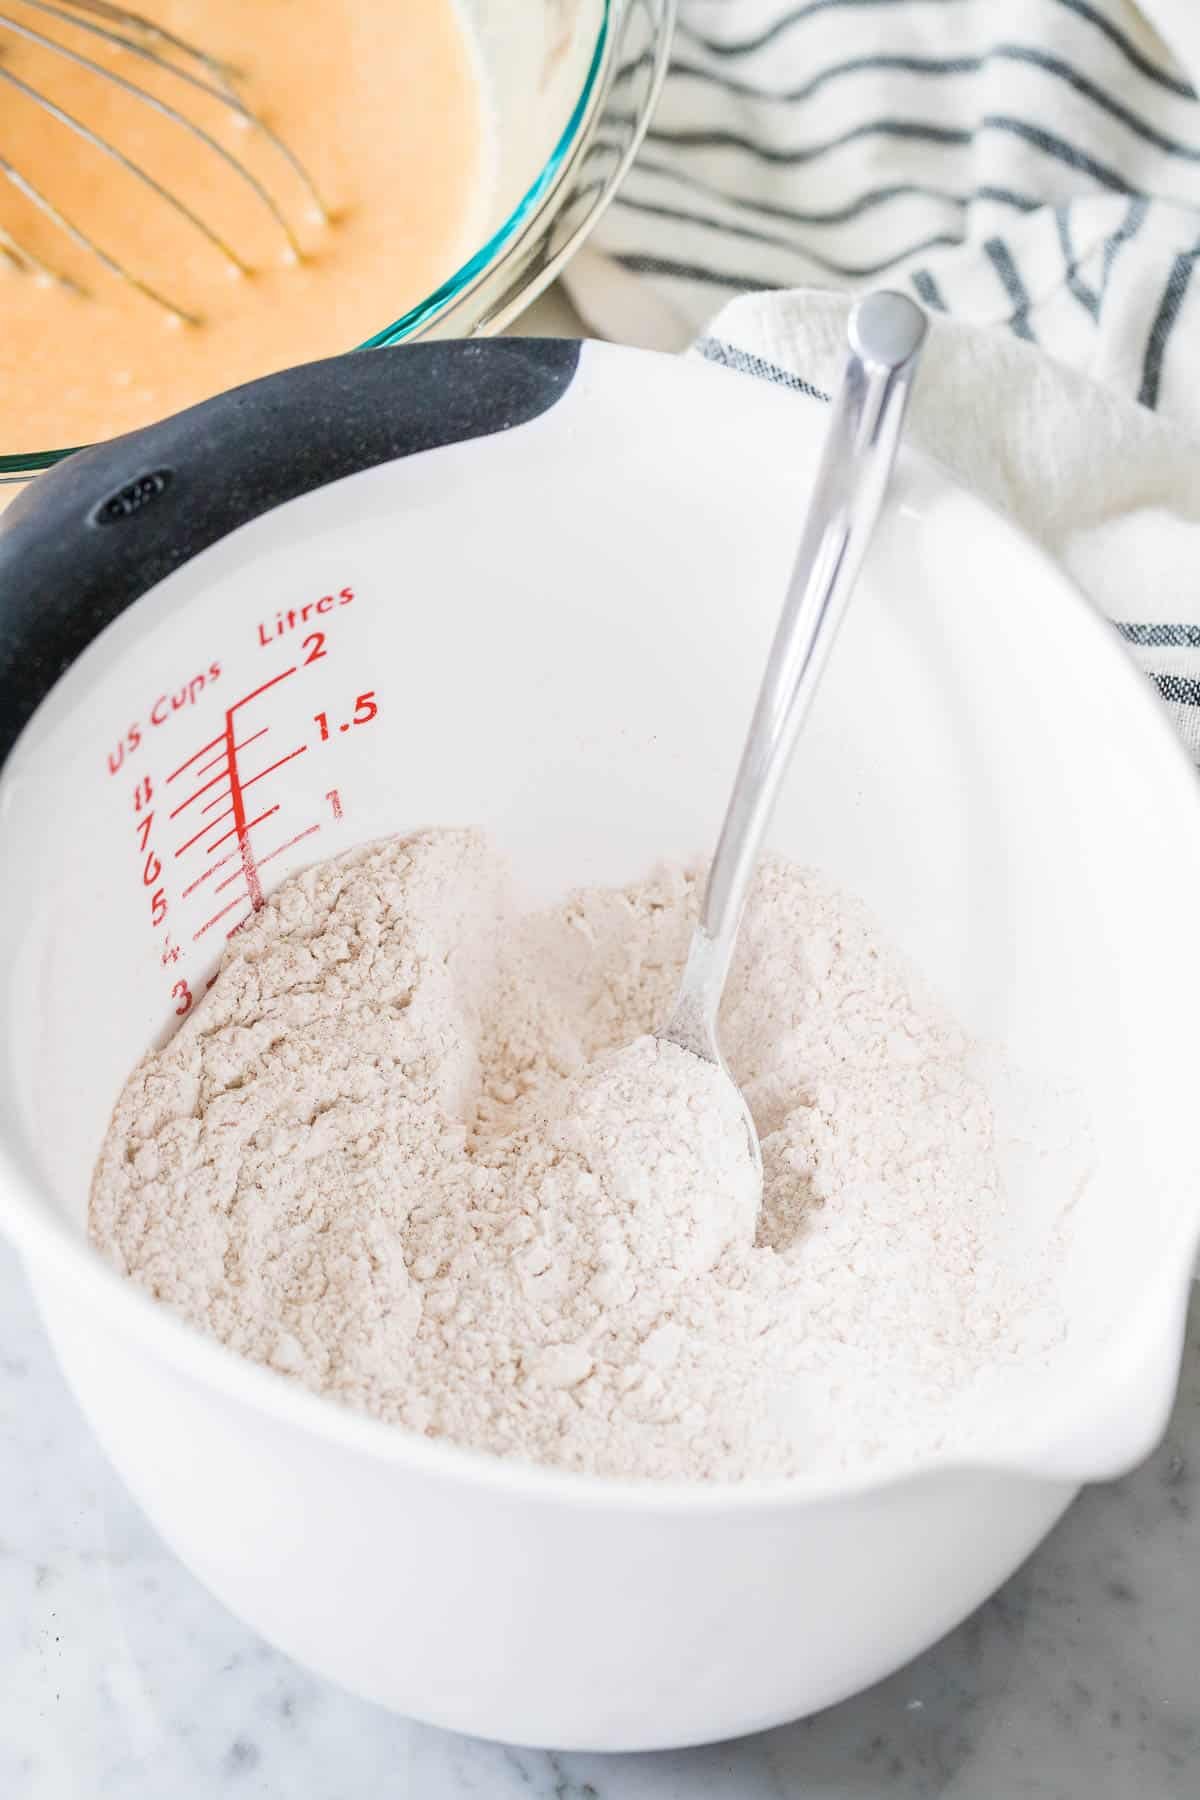 Dry ingredients in a measuring bowl with a spoon.